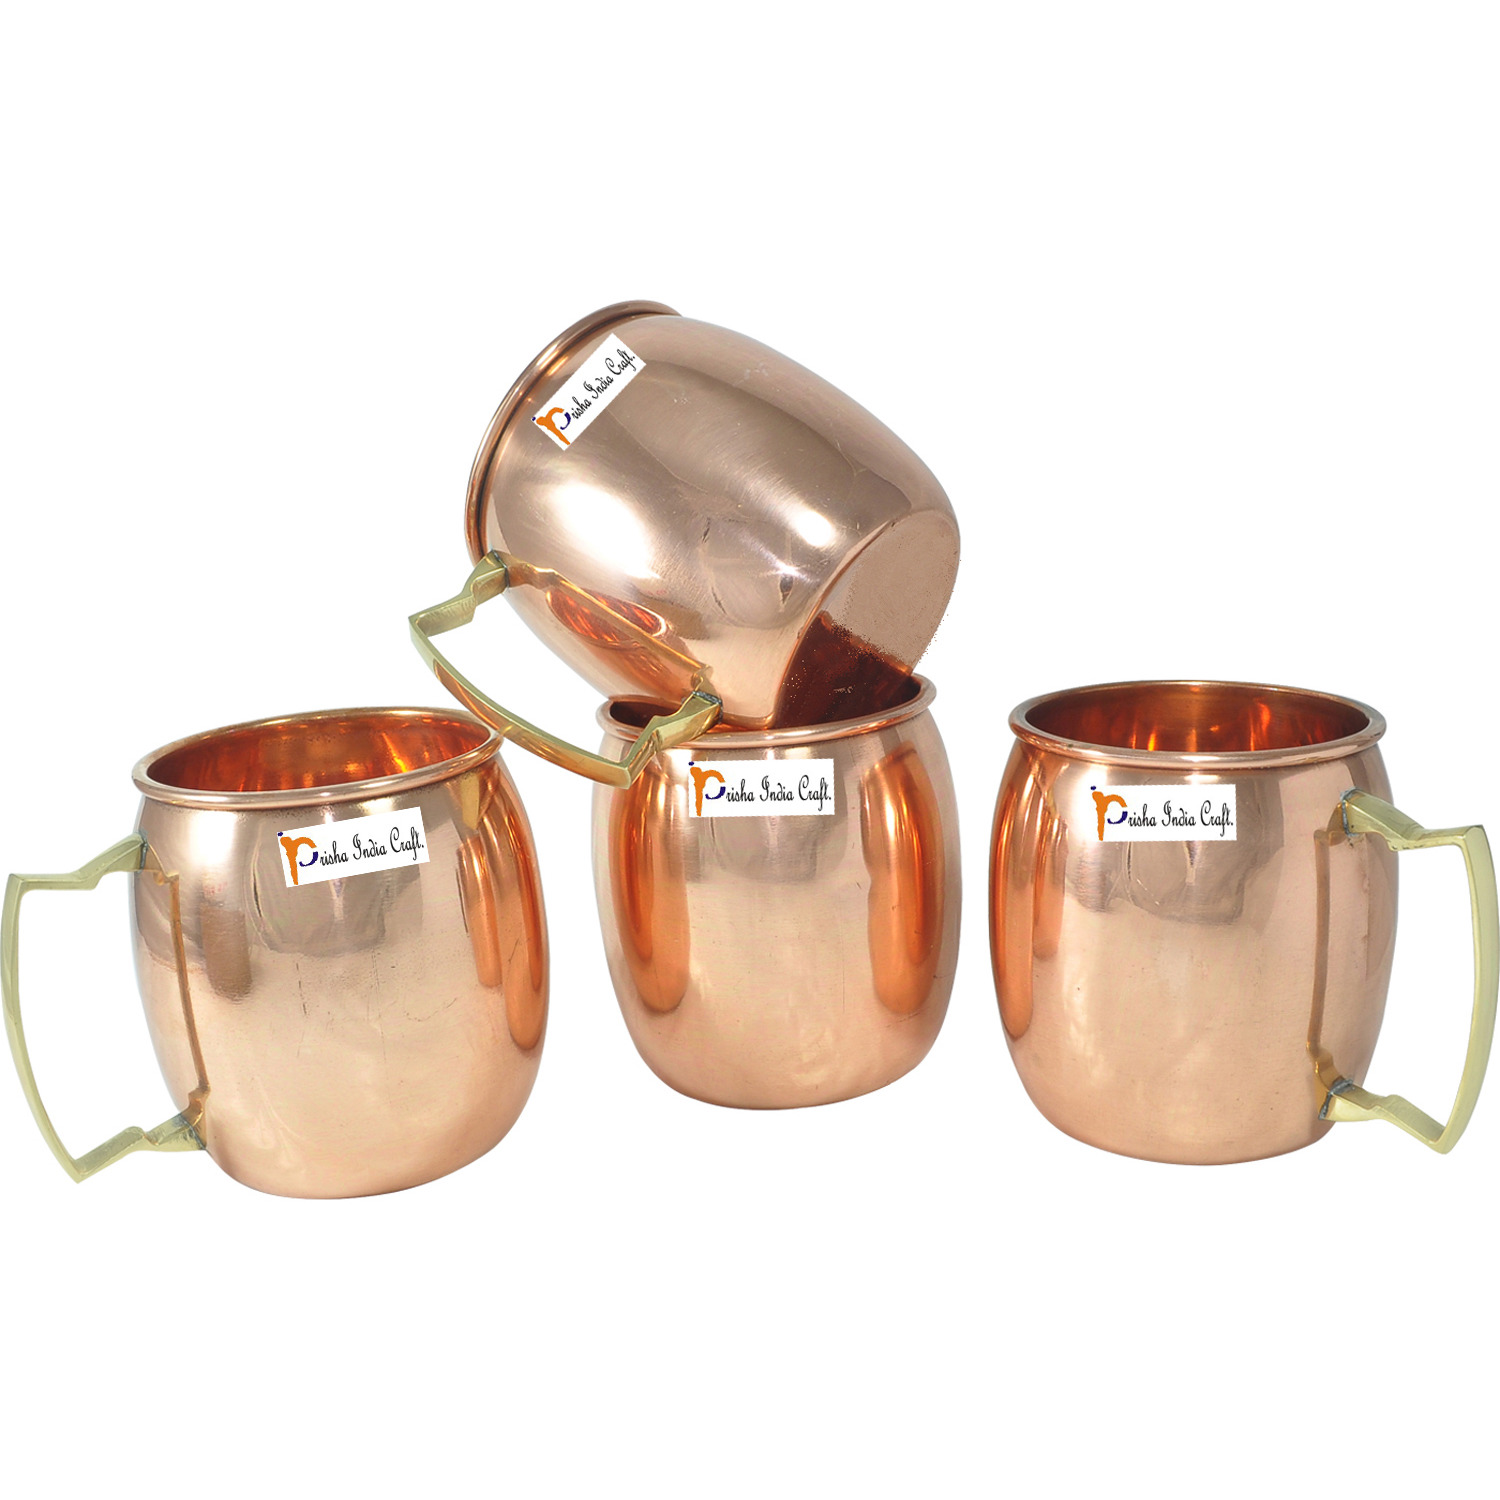 Set of 4 - Prisha India Craft B. Solid Copper Mug for Moscow Mules 550 ML / 18 oz 100% Pure Copper FREE 4 SHOT MUG 2 - OUNCE, Moscow Mule Cocktail Cup, Copper Mugs, Cocktail Mugs